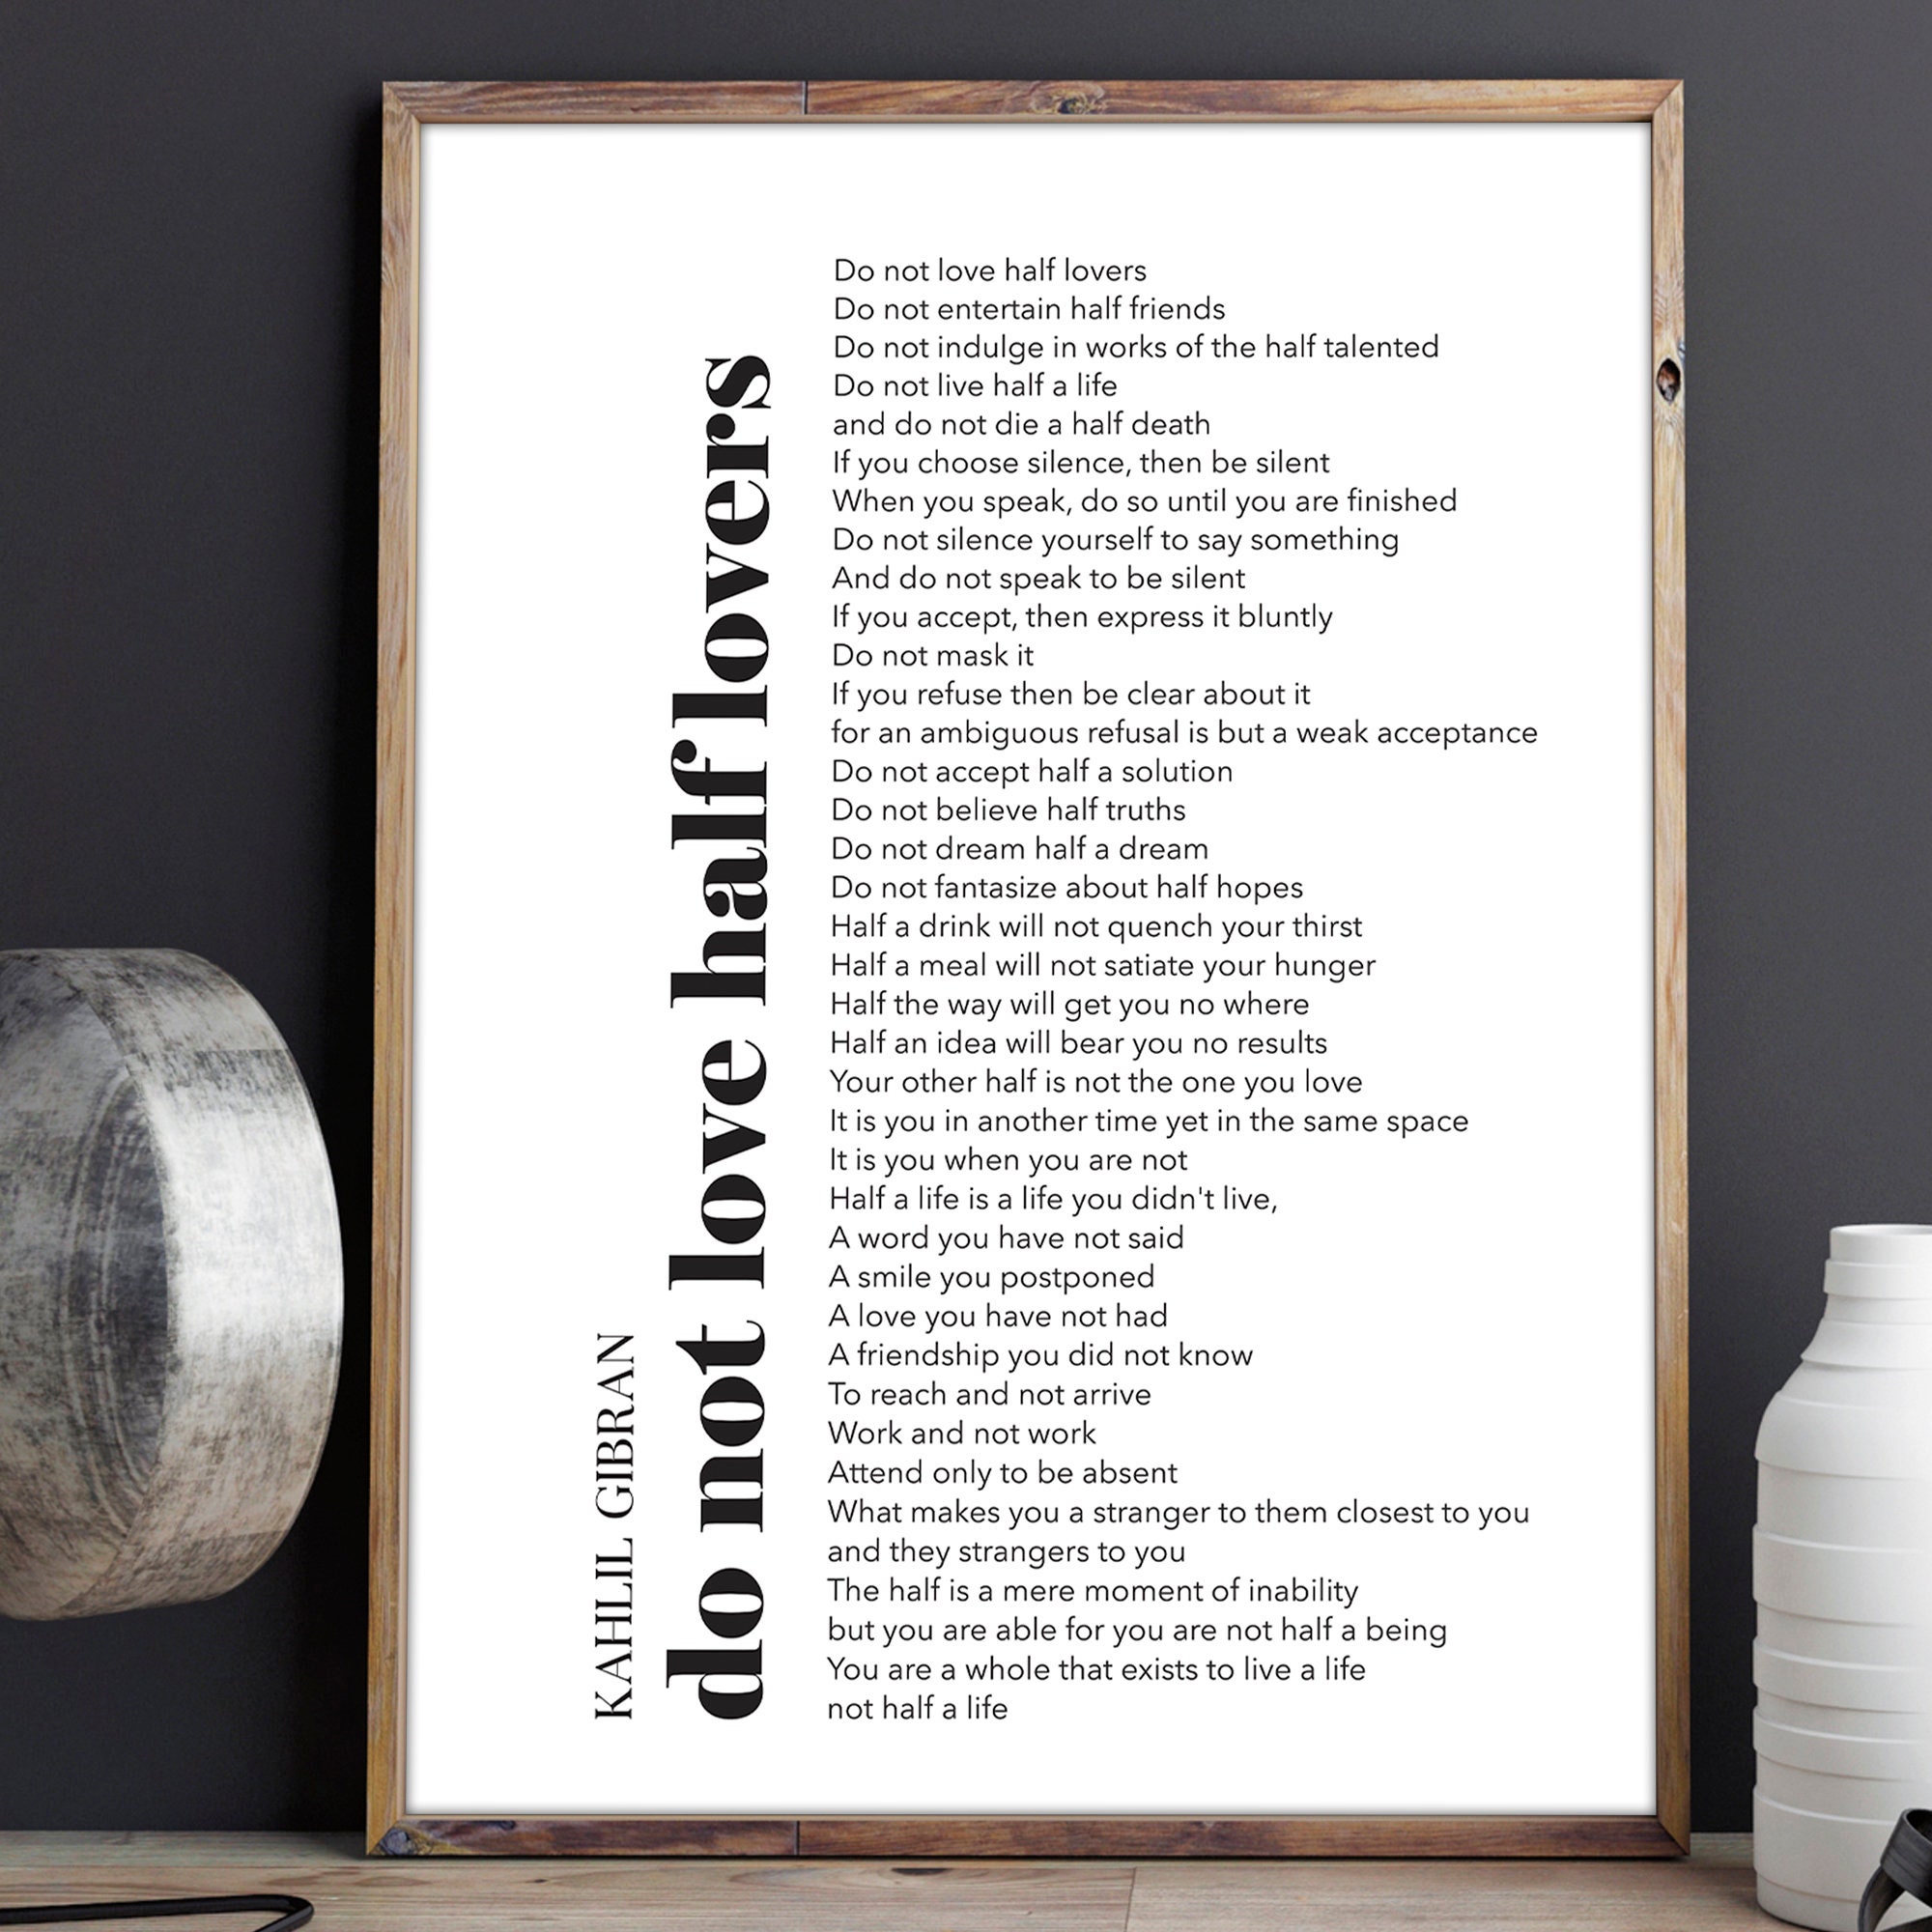 Kahlil Gibran Poem Do Not Love Half Lovers Philosophy Inspiration  Motivation Print Wall Art Quote INSTANT DOWNLOAD -  Canada